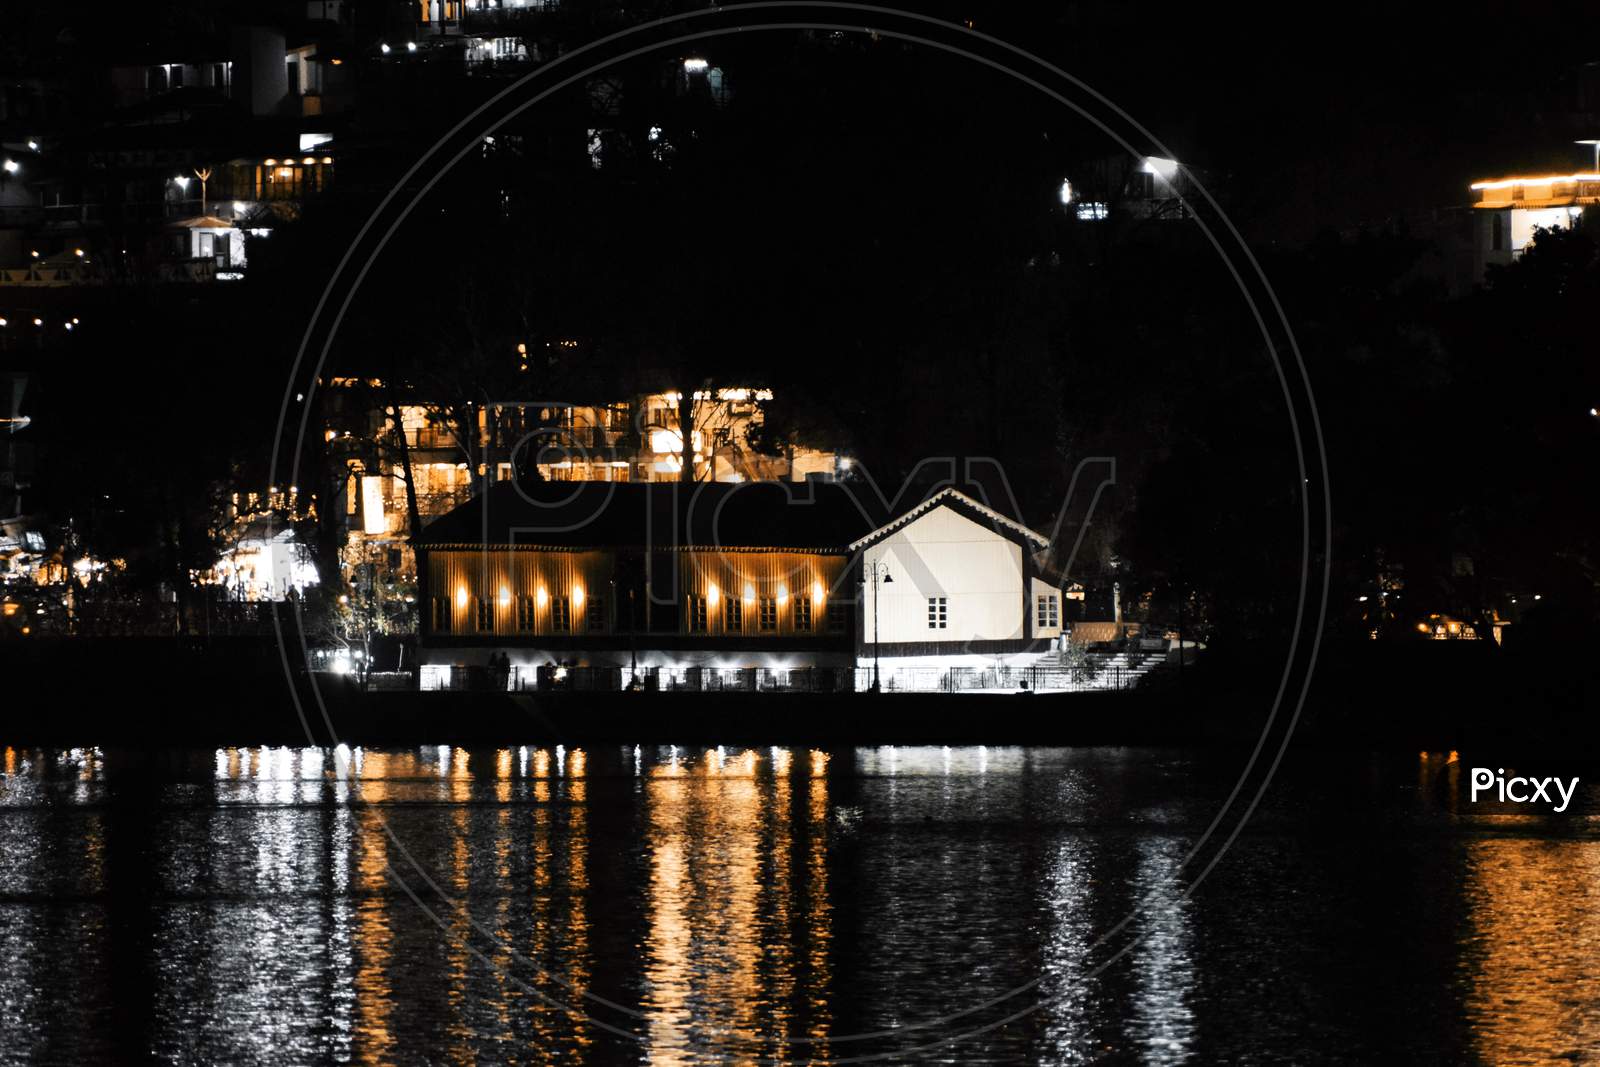 Beautiful Picture Of House And Light Reflexion On Lake. Selective Focus On Subject, Nainital Uttarakhand